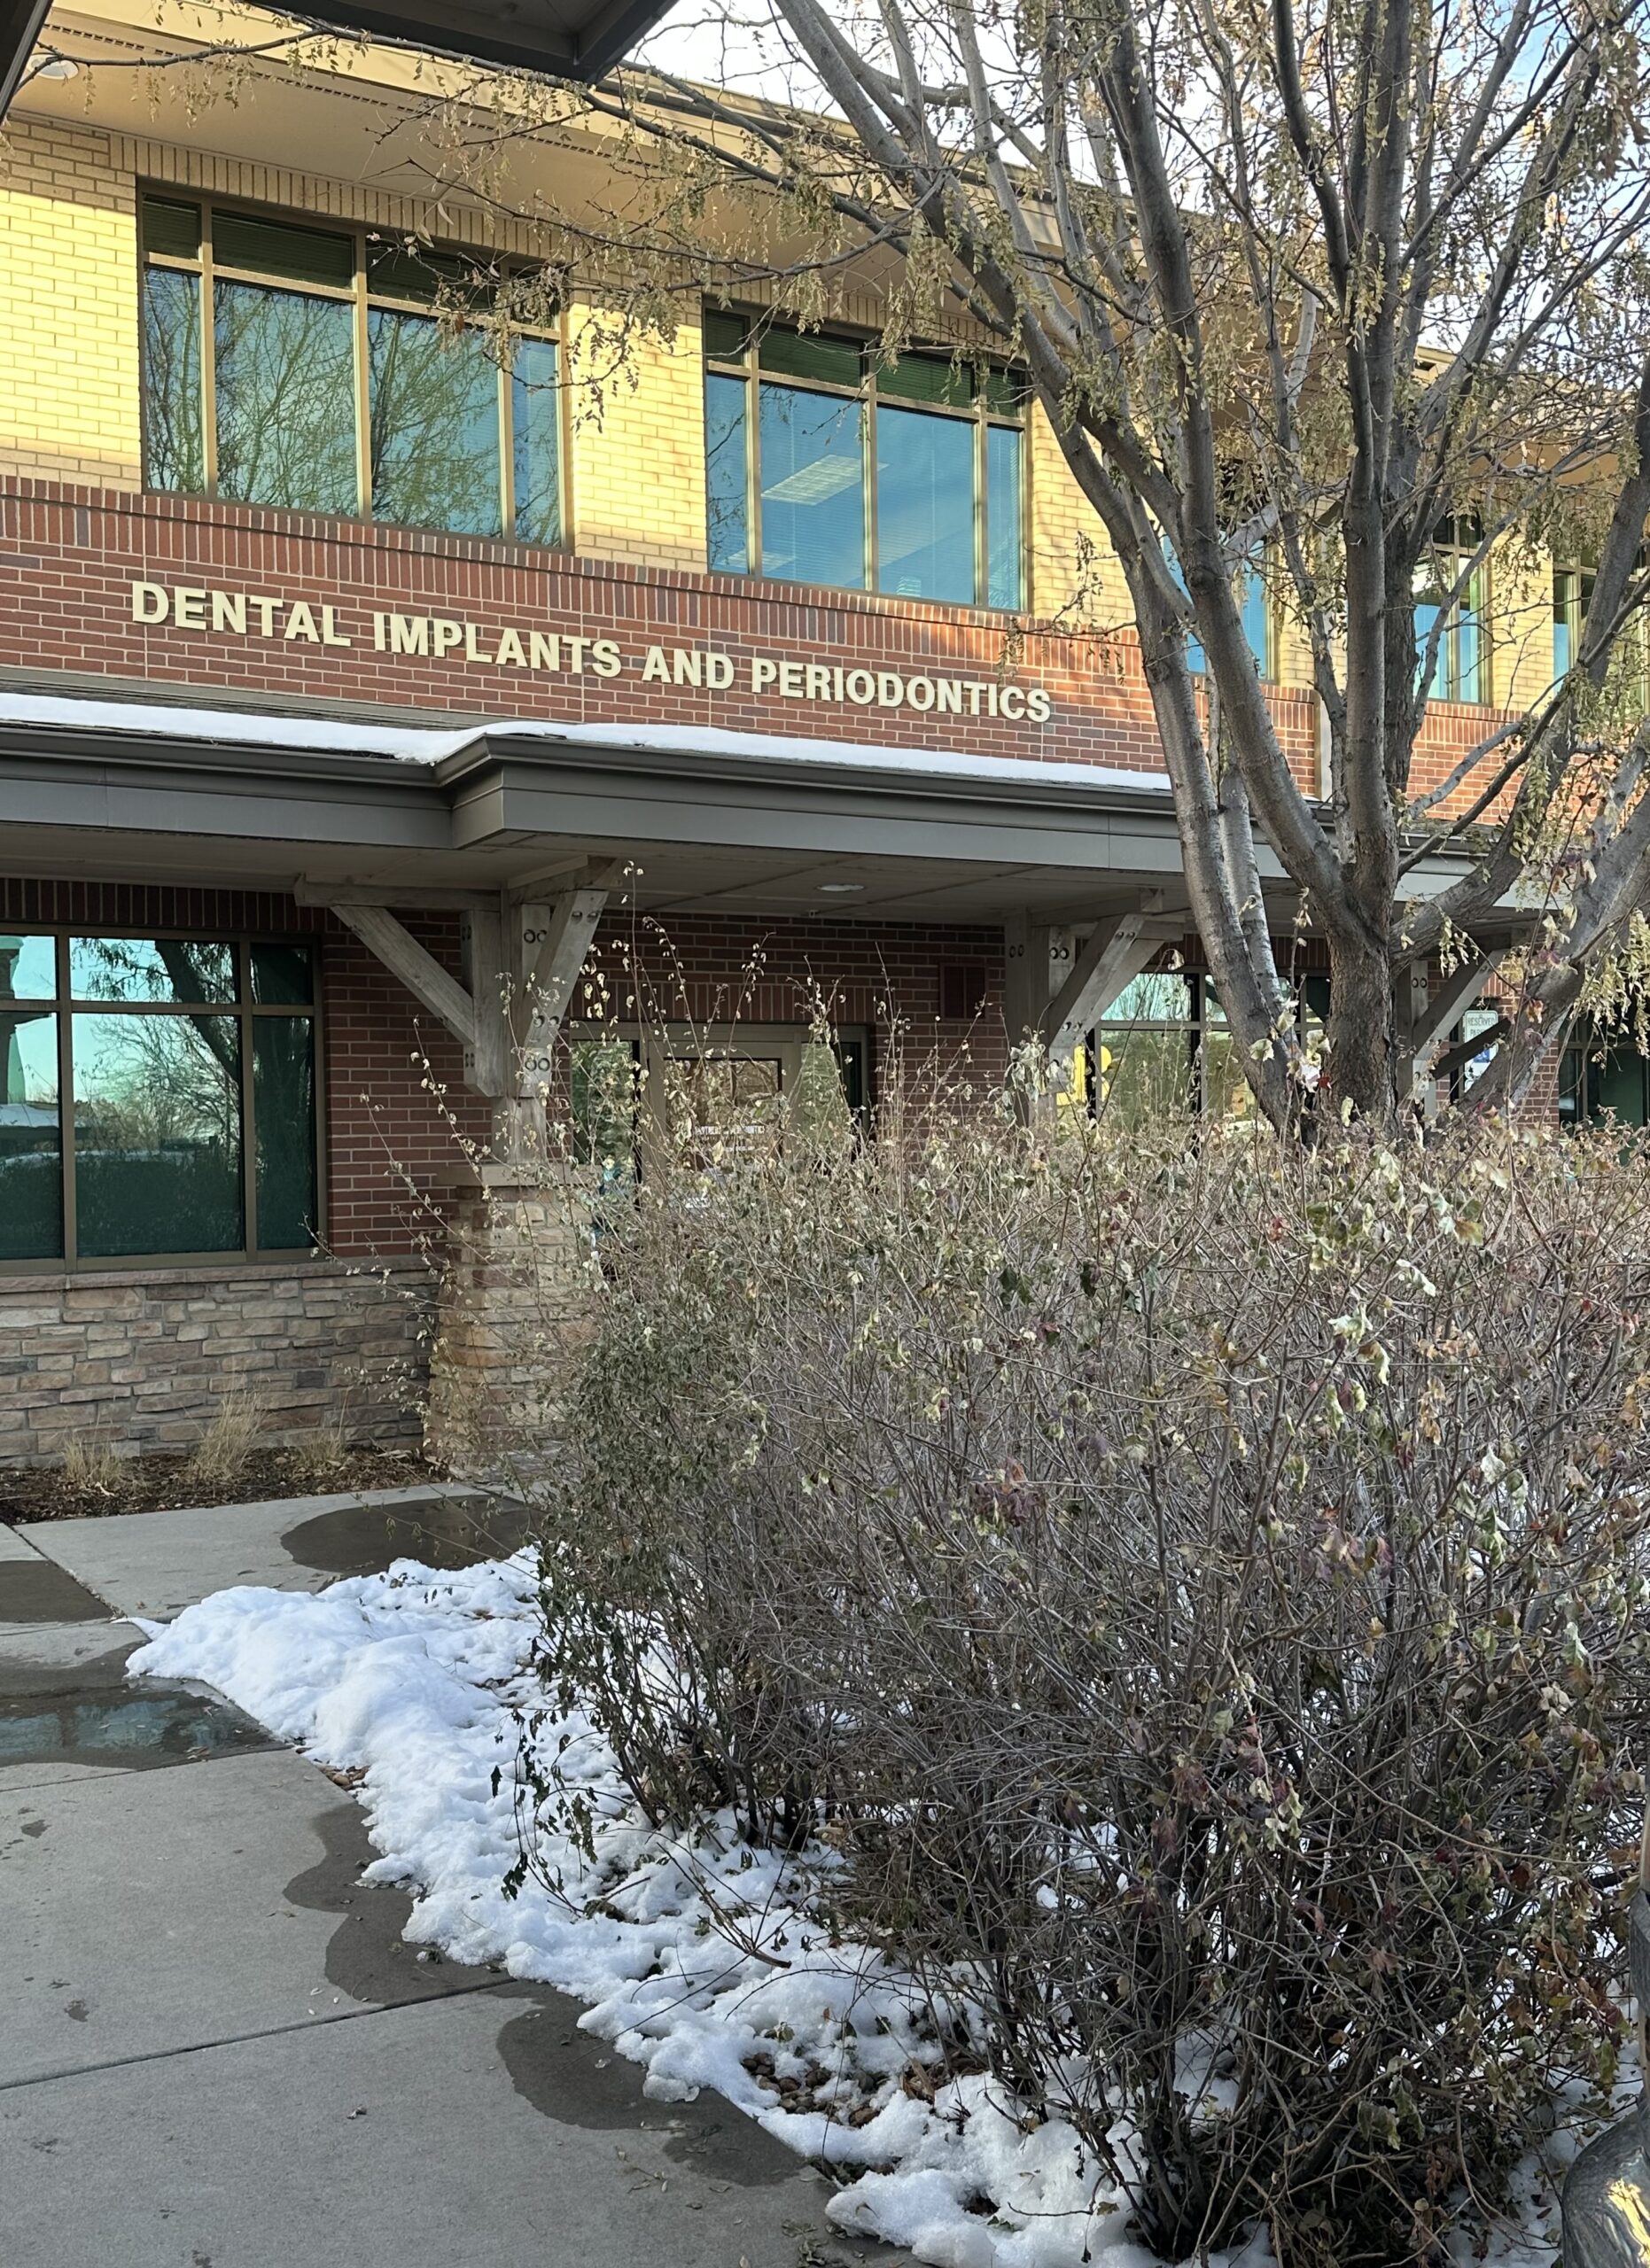 Dr. Chad Riggs. Partners in Periodontics. Dental Implants, Cosmetic Periodontal Surgery, Gum Grafting, Periodontal Therapy, Teeth in a Day, Tooth Extractions. Periodontist in Loveland, CO 80538